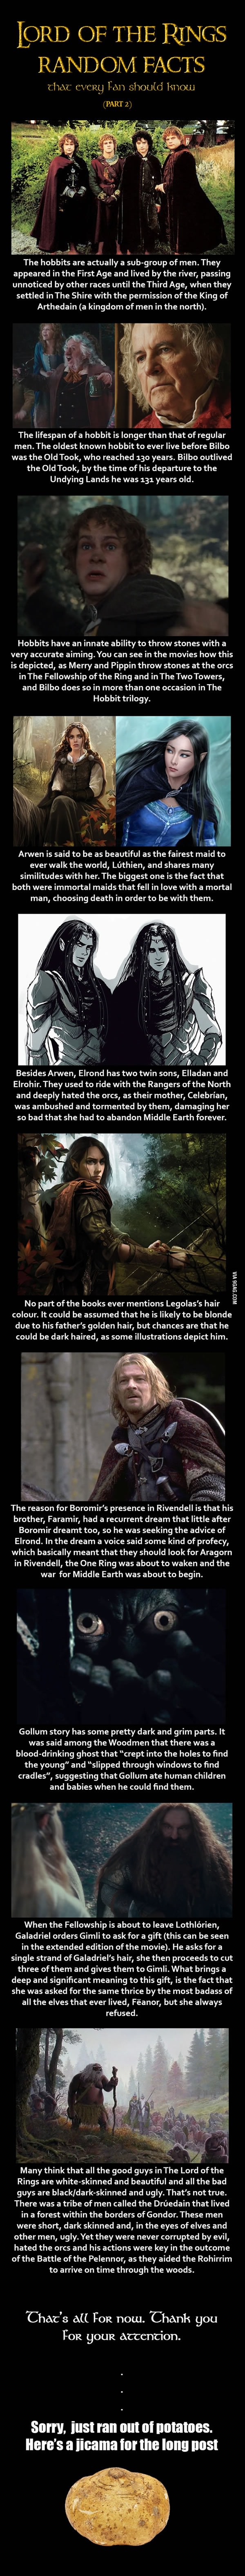 Lord of the Rings Random Facts Part 2